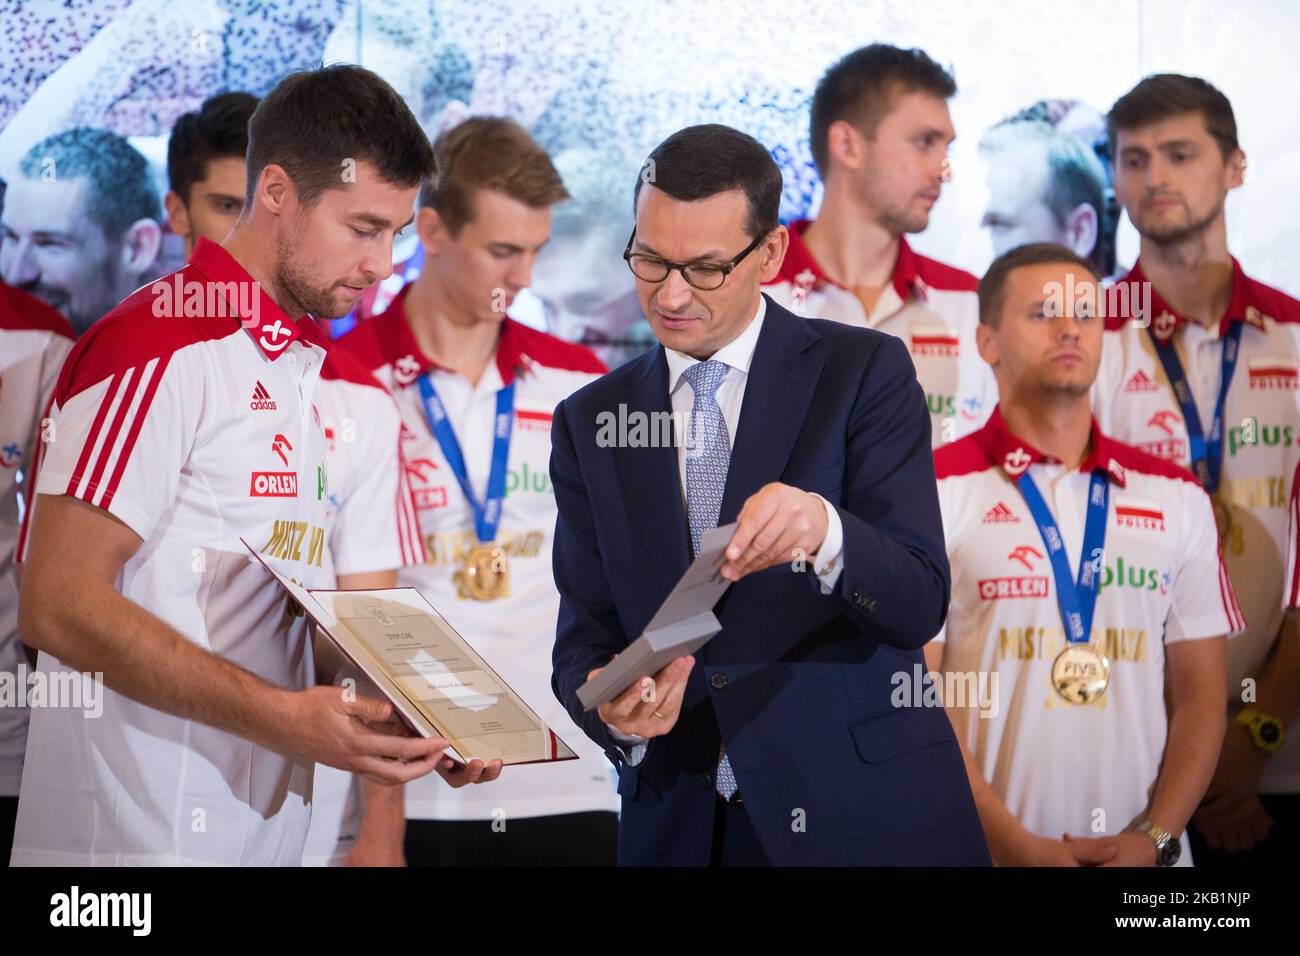 Michal Kubiak and Prime Minister of Poland Mateusz Morawiecki during the meeting with Poland men's national volleyball team at Chancellery of the Prime Minister in Warsaw, Poland on 1 October 2018. Poland won the gold medal after defeating Brazil in FIVB Volleyball Men's World Championship Final in Turin on 30 September. (Photo by Mateusz Wlodarczyk/NurPhoto) Stock Photo